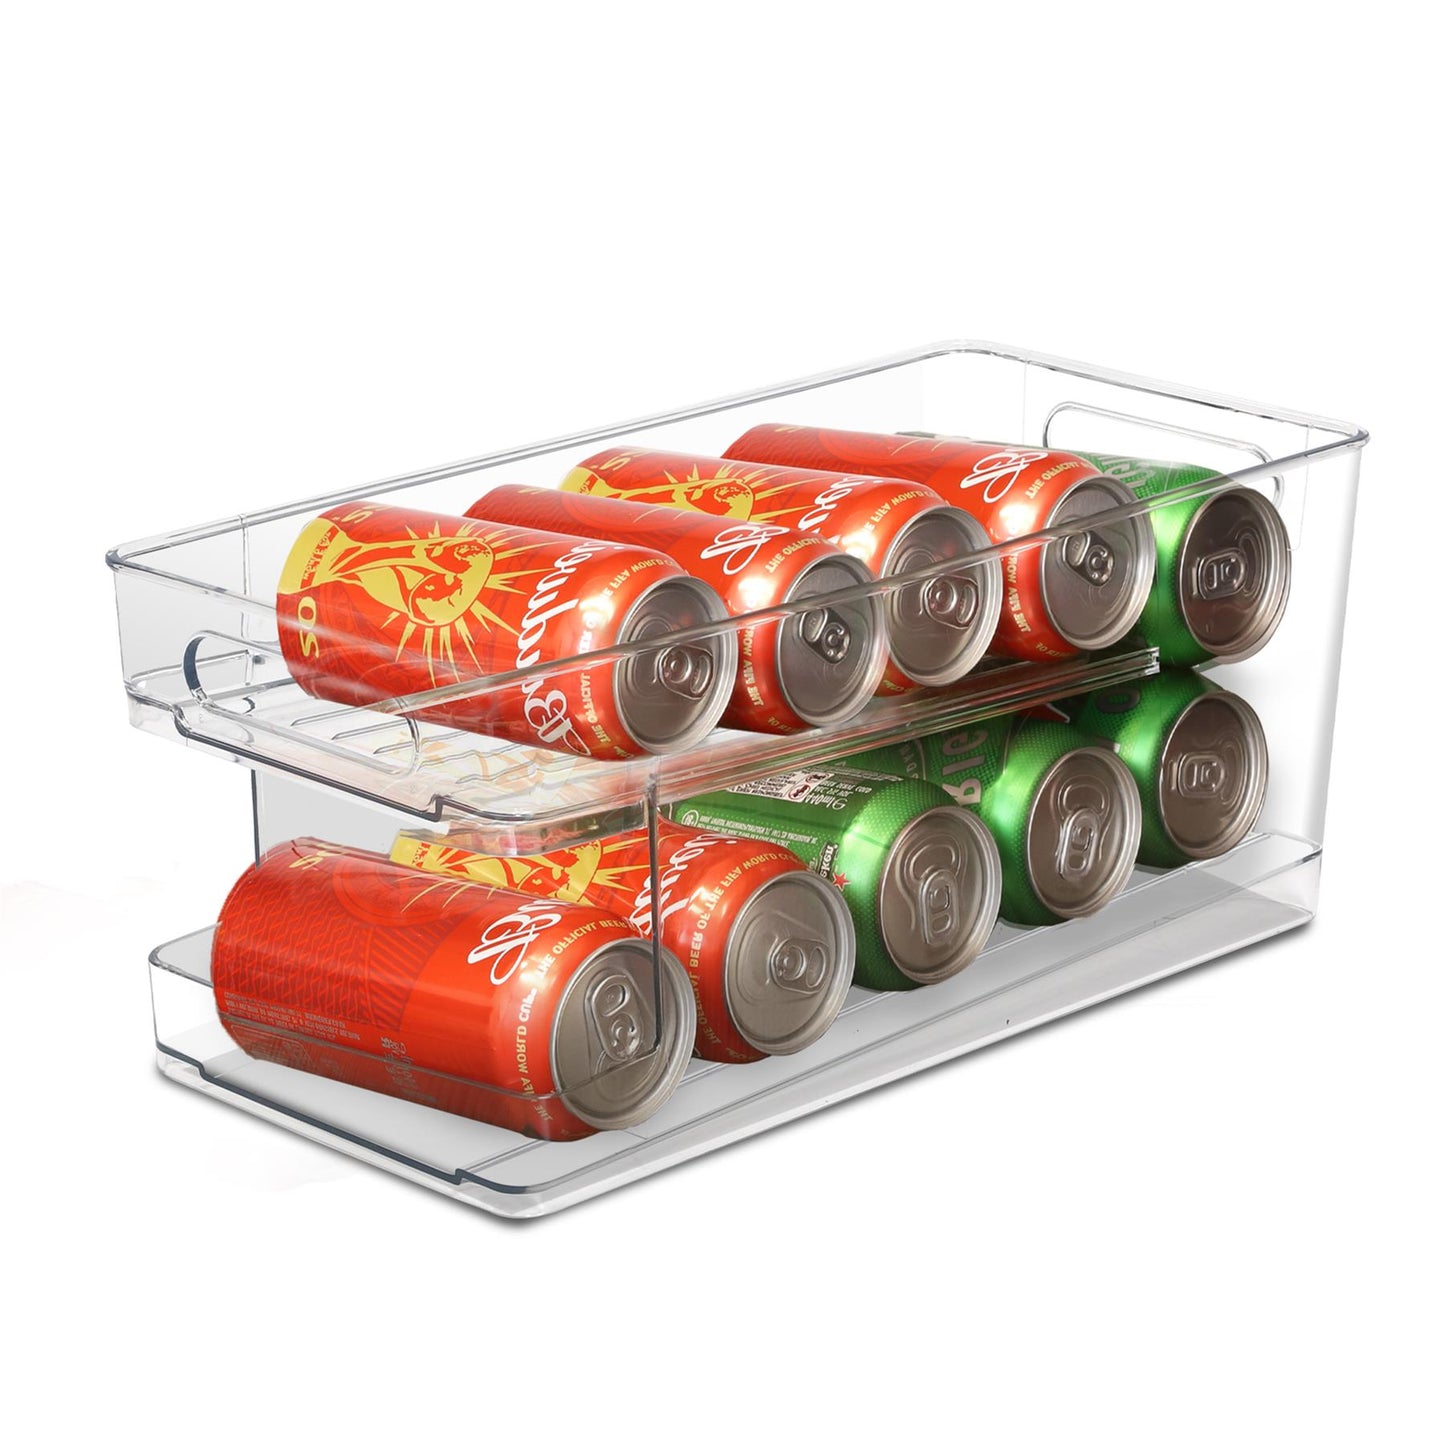 Efficient Fridge Can Dispenser For Beer And Soda Cans